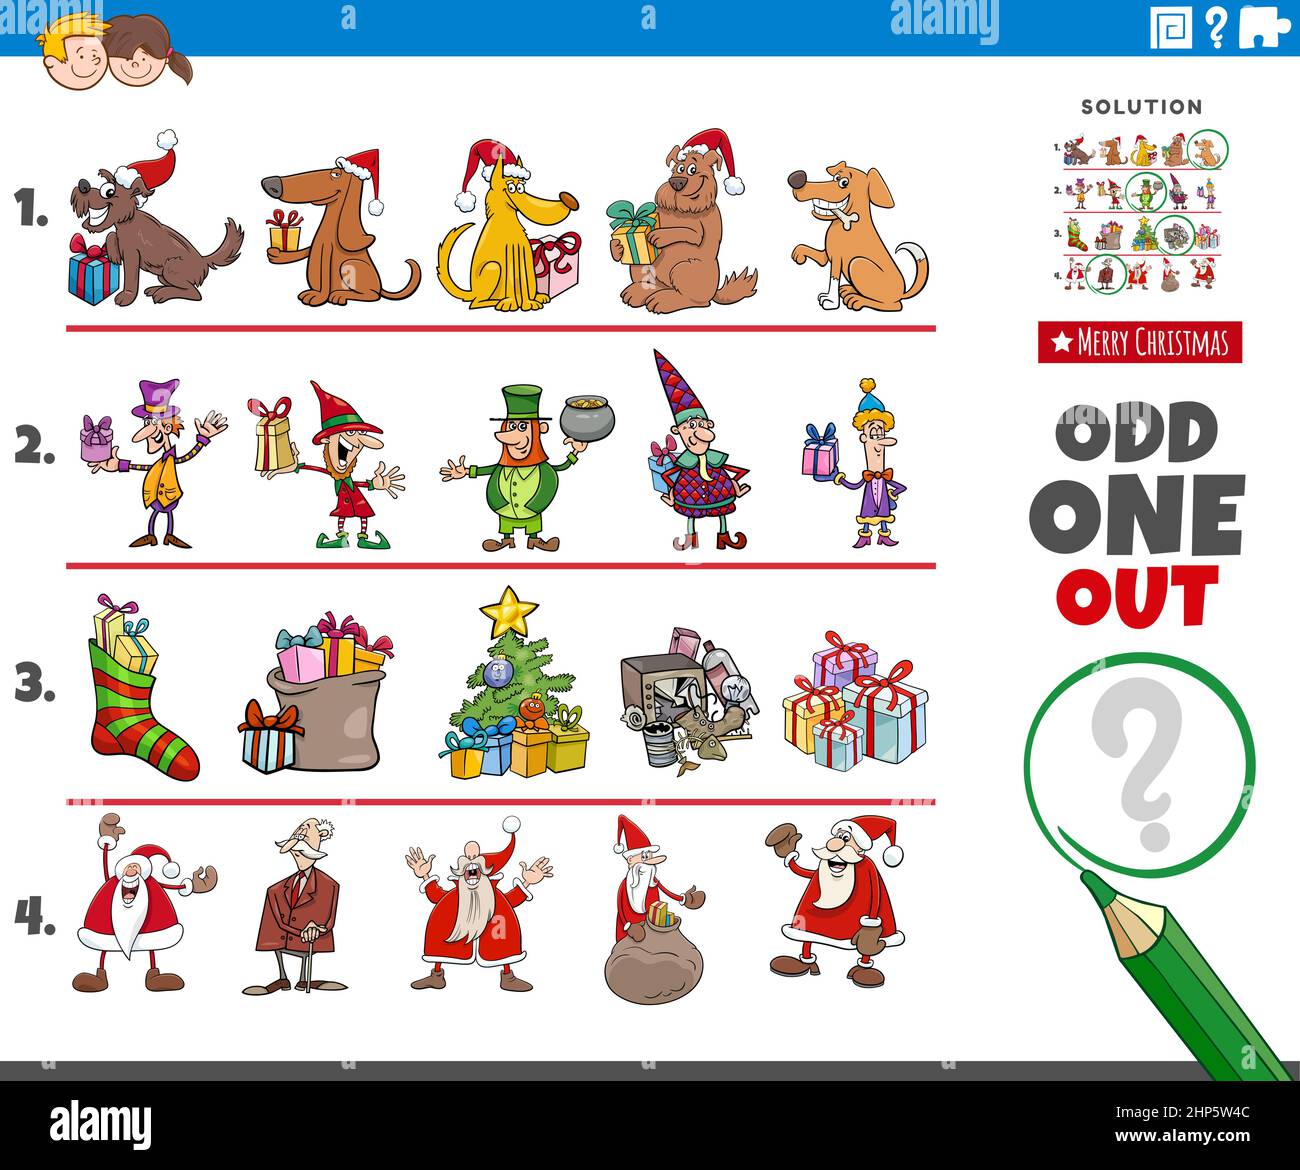 odd one out picture game with Christmas characters and objects Stock Vector